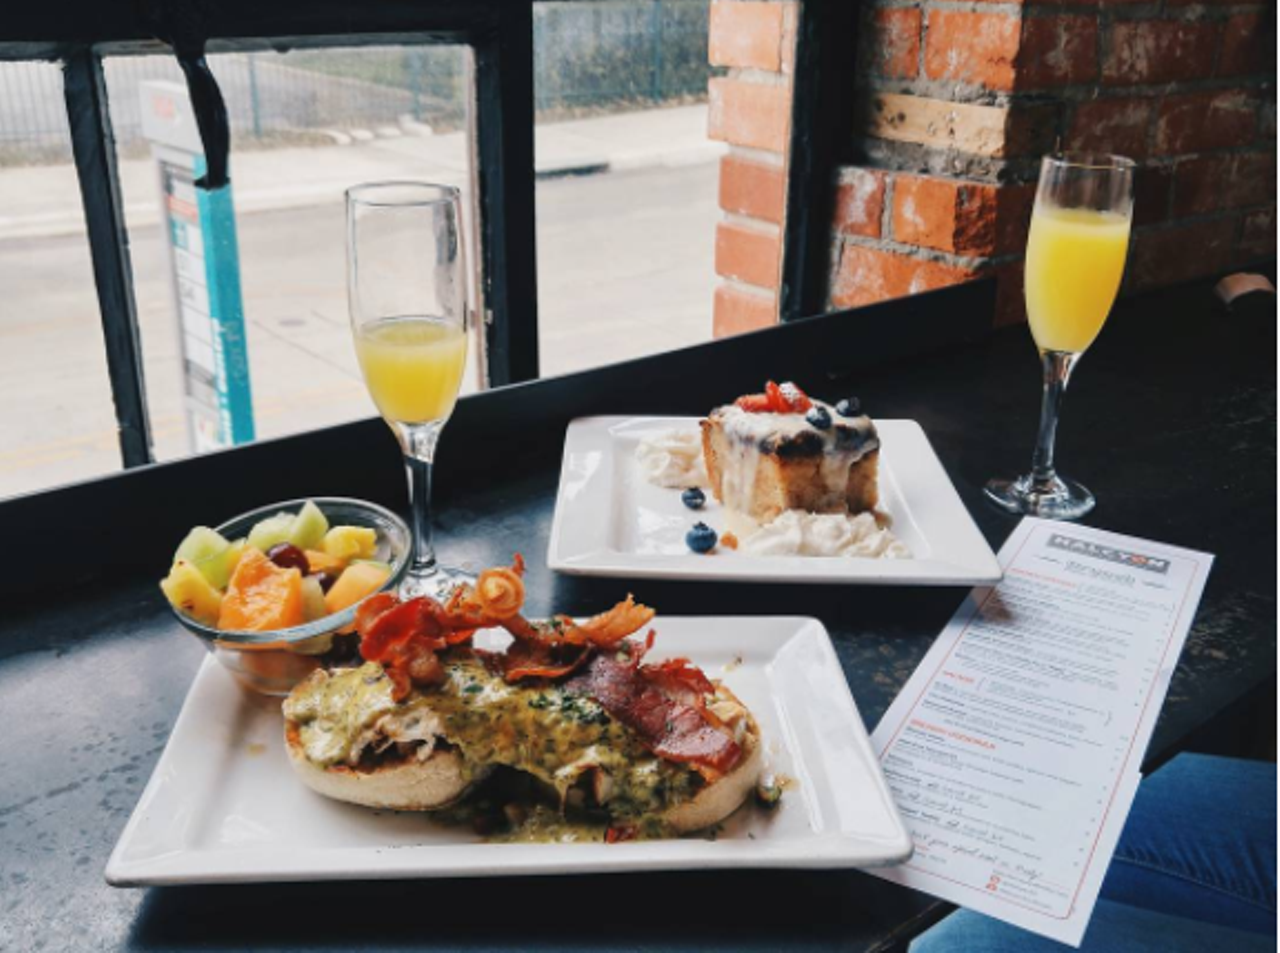 Halcyon
1414 S. Alamo St., (210) 277-7045,  halcyoncoffeebar.com
Halcyon&#146;s brunch is what dreams are made up. Get to the eatery/coffeeshop/cool hang out spot early for delicious way to get the weekend started. 
Photo via Instagram,  gabrielle_herrera